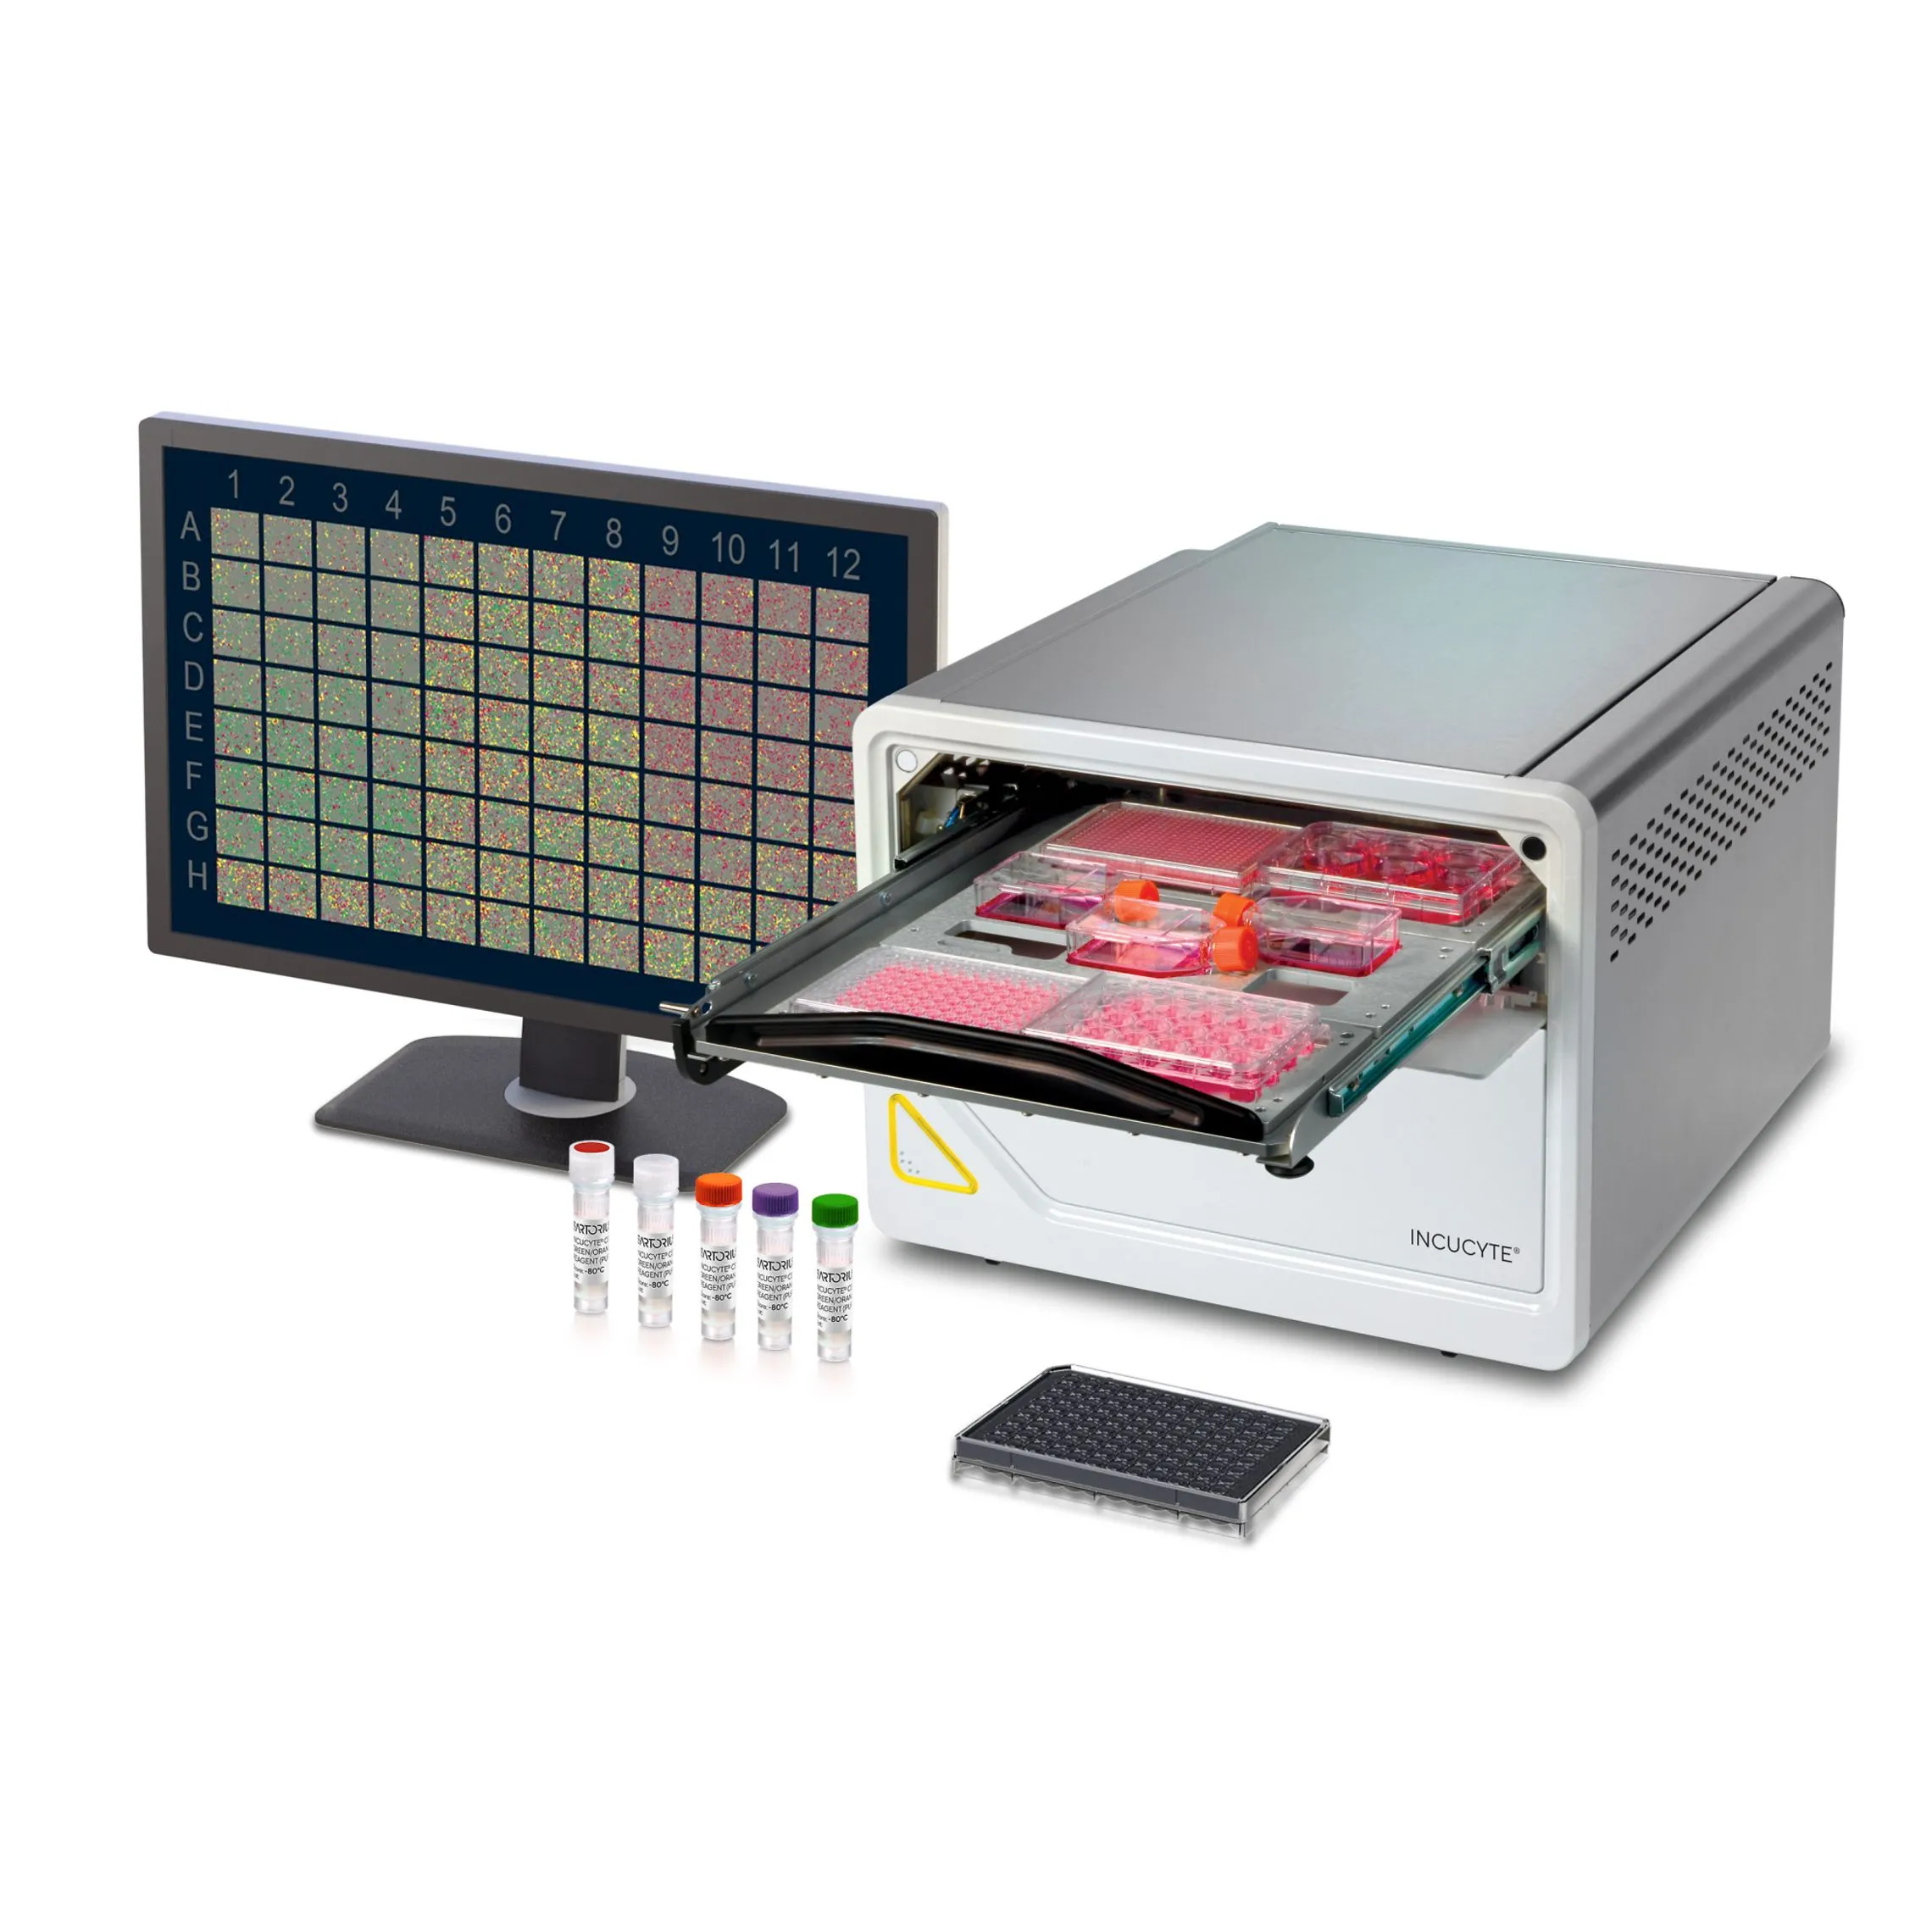 Sartorius IncuCyte SX5 -- Certified with Warranty